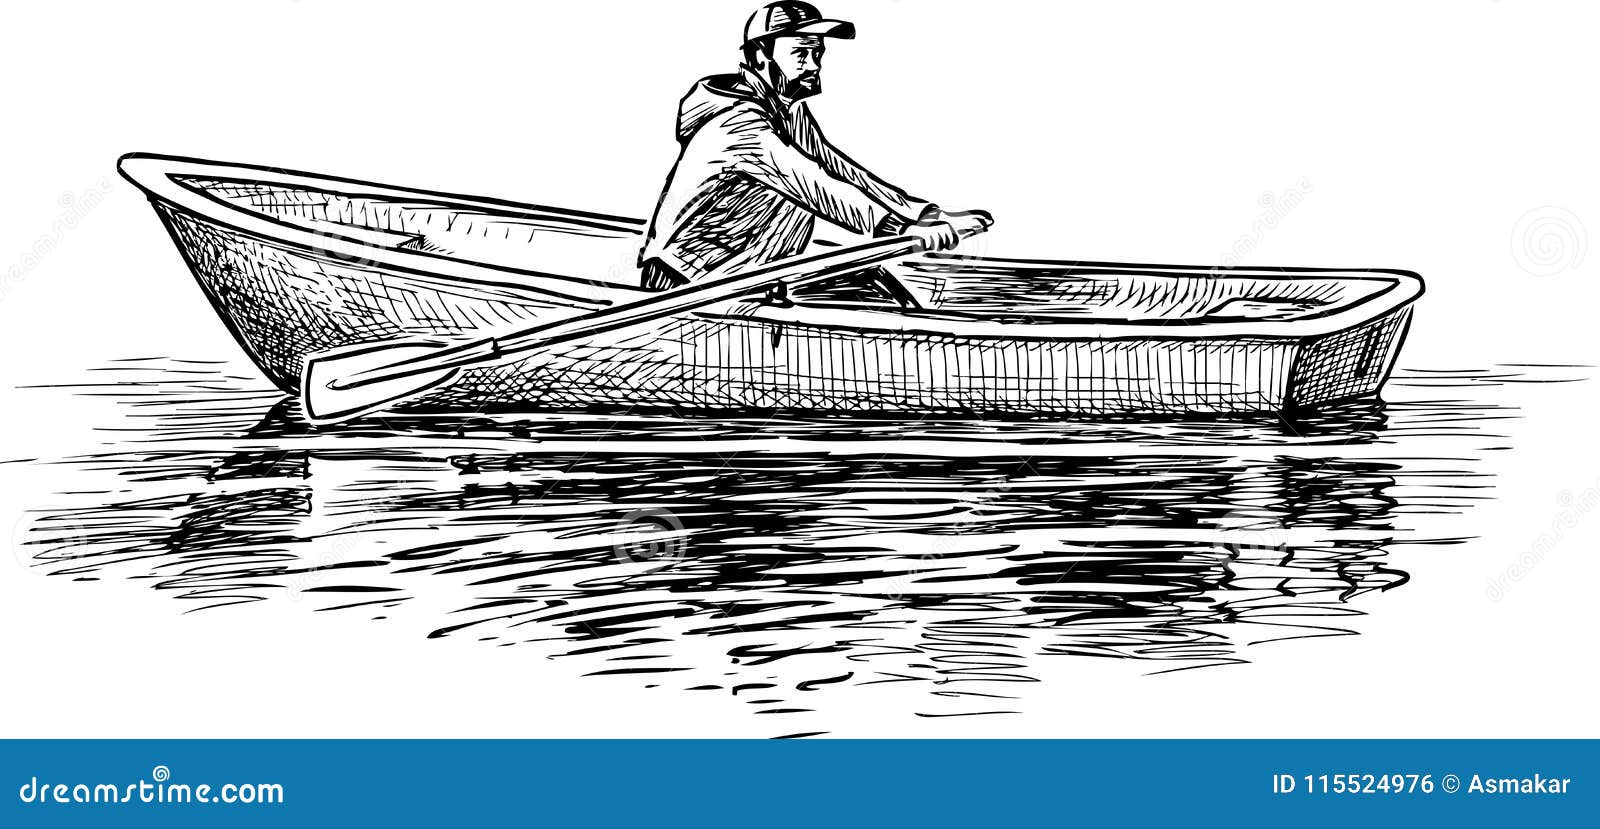 Sketch of a Man with Oars in a Boat Stock Vector - Illustration of swim ...